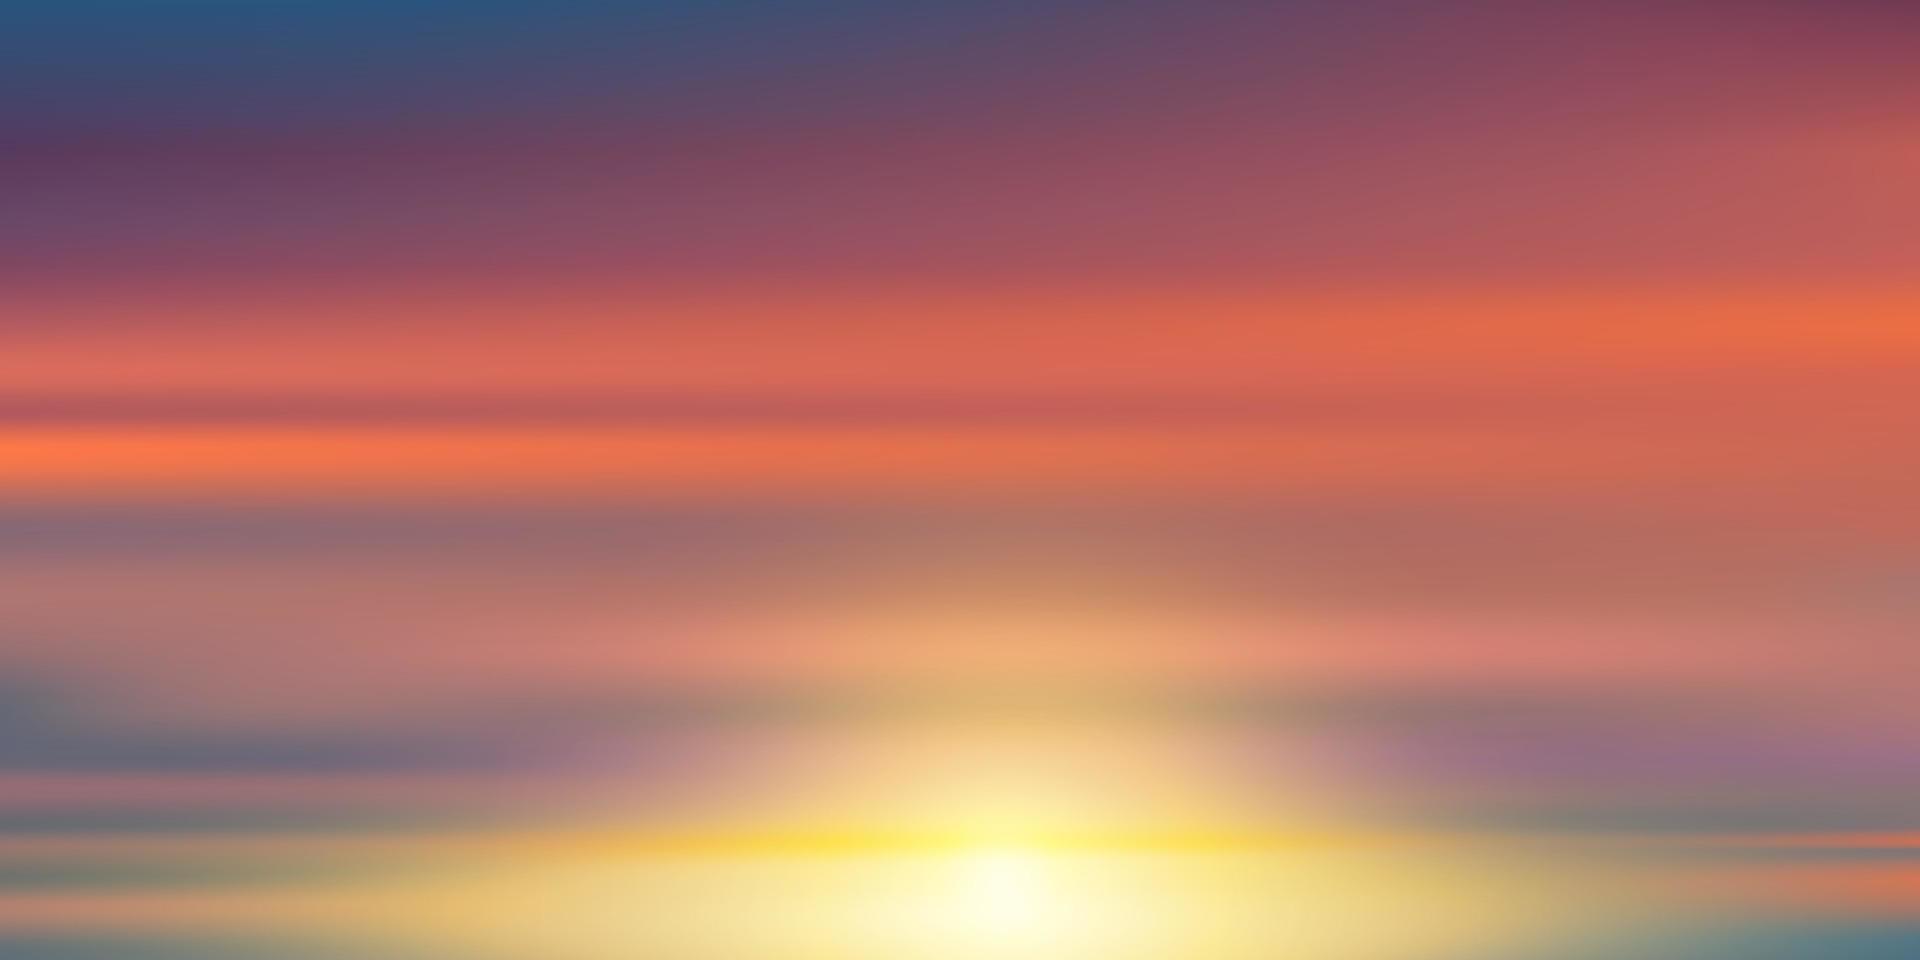 Sky Sunset evening with Orange,Yellow,Pink,Purple,Blue color, Golden hour Dramatic twilight landscape,Vector Banner horizontal Romantic Sky of Sunrise or Sunlight for four seasons background. vector